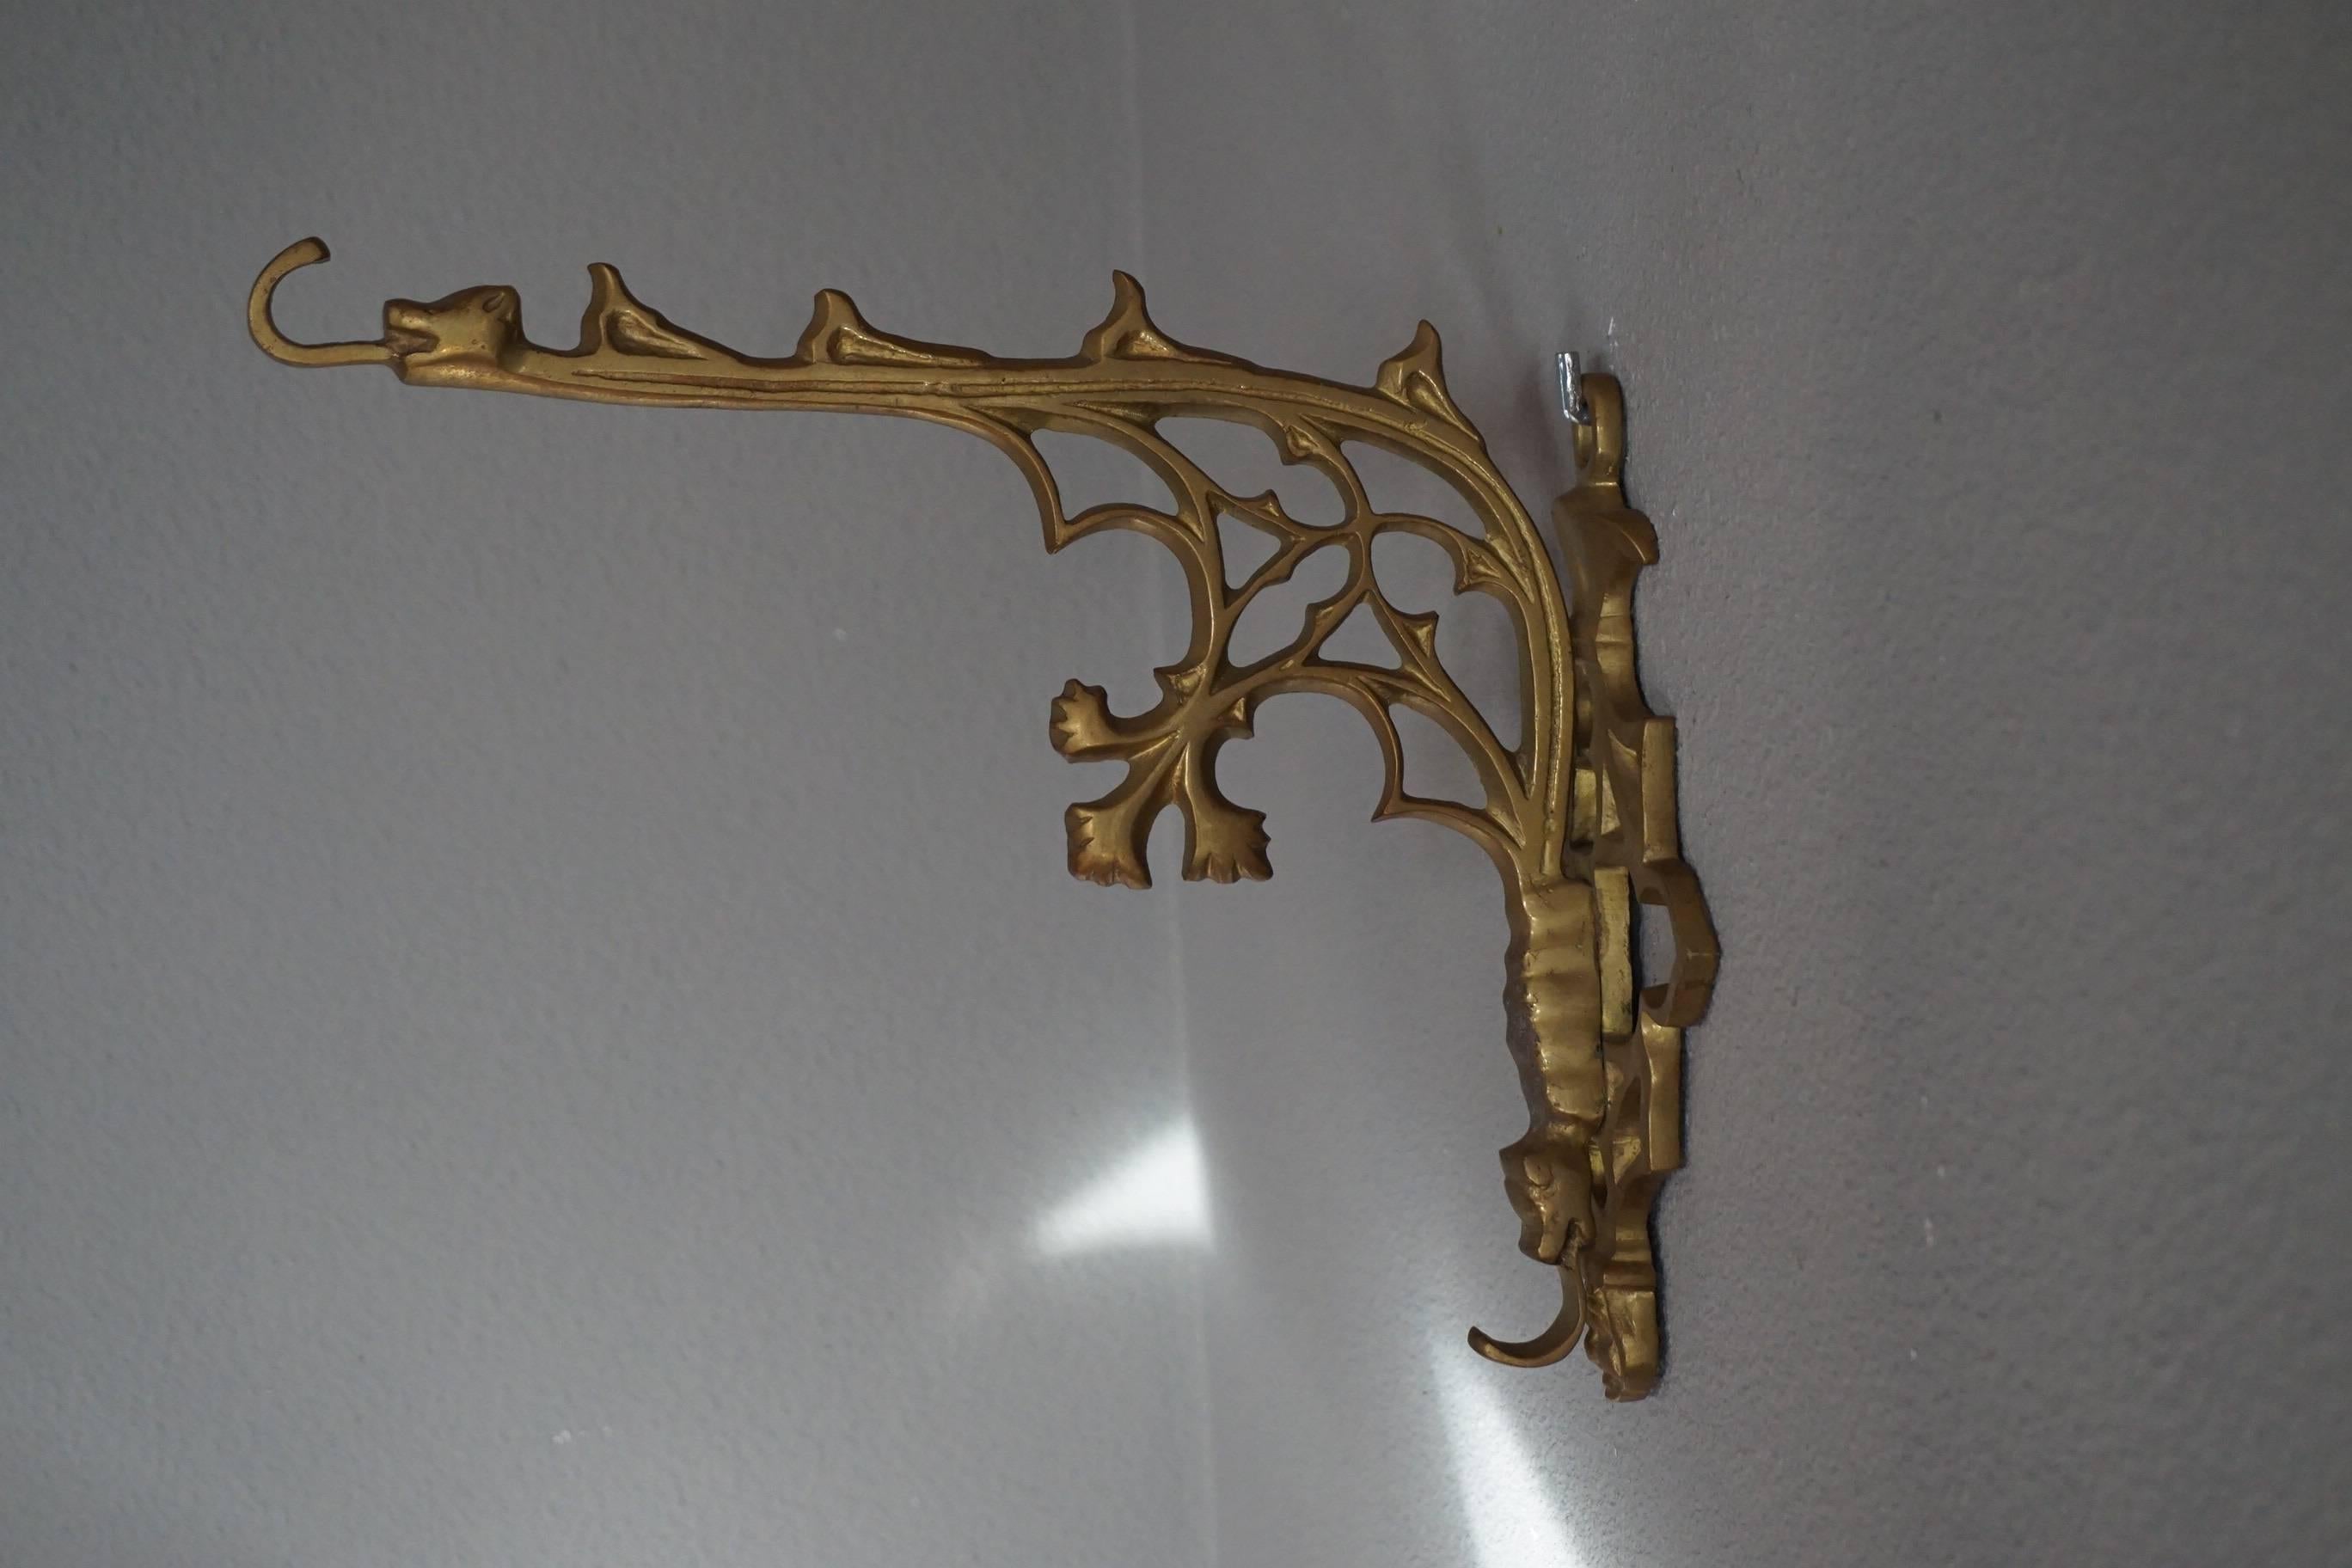 Rare pair of multi-purpose, Gothic art wall brackets.

If you are looking for a decorative pair of Gothic Revival wall brackets then look no further. These stylish Gothic brackets can be used for hanging all kinds of items on. You could also turn